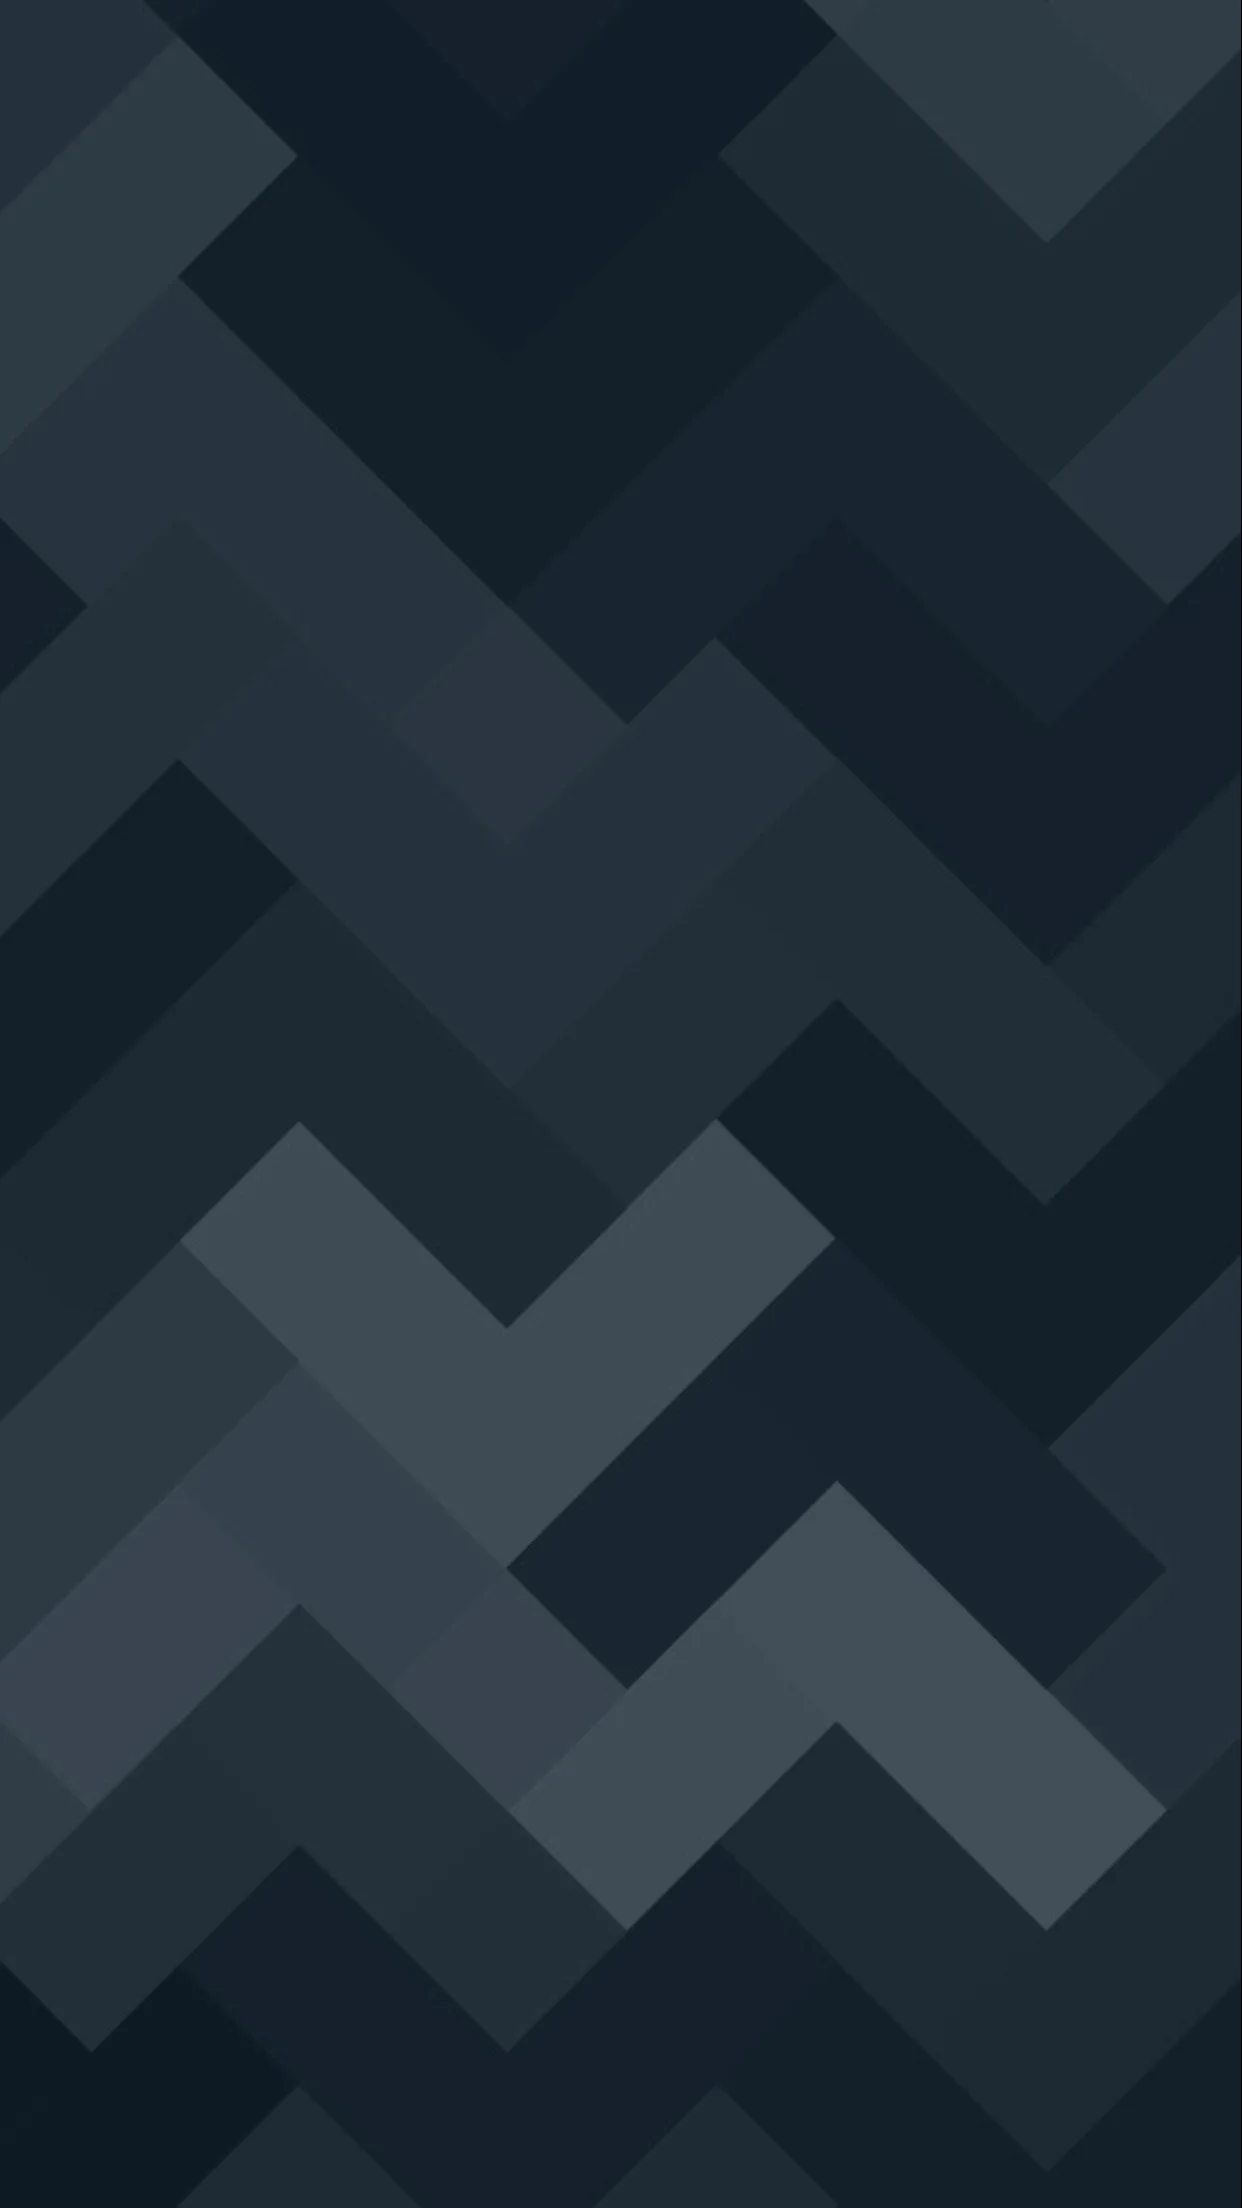 Shape wallpaper phone beautiful collection of geometric wallpapers for iPhone